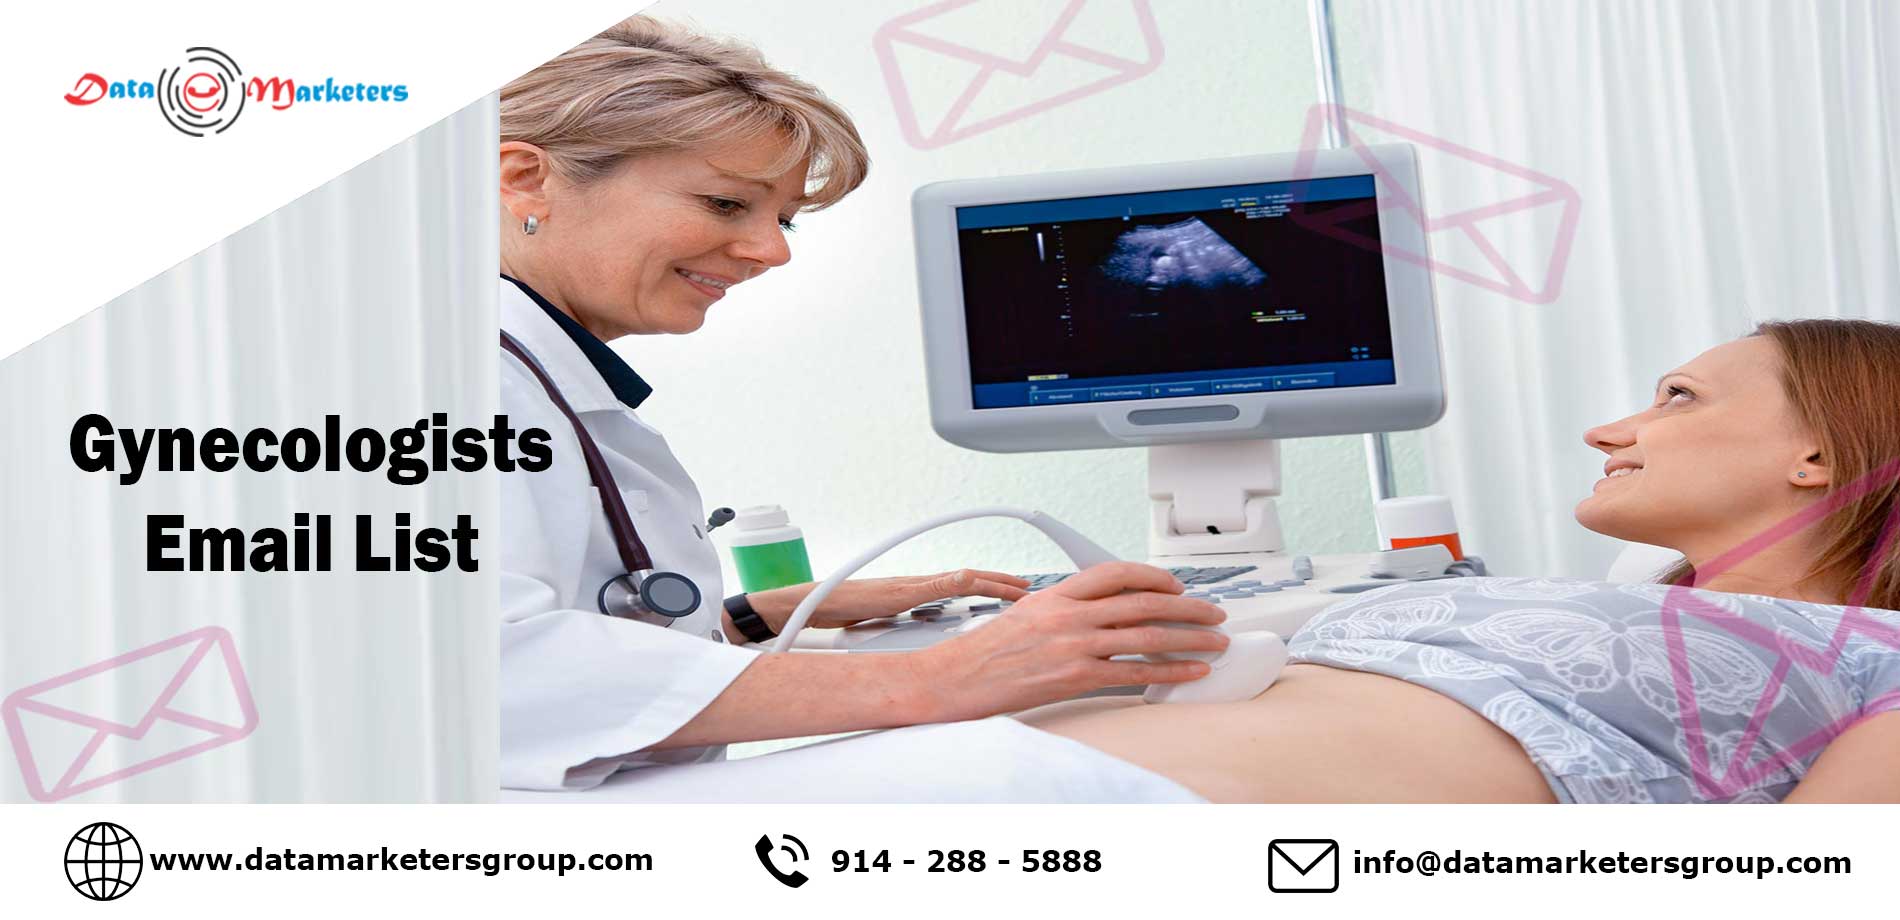 Gynecologists Email List | Gynecologists Mailing List